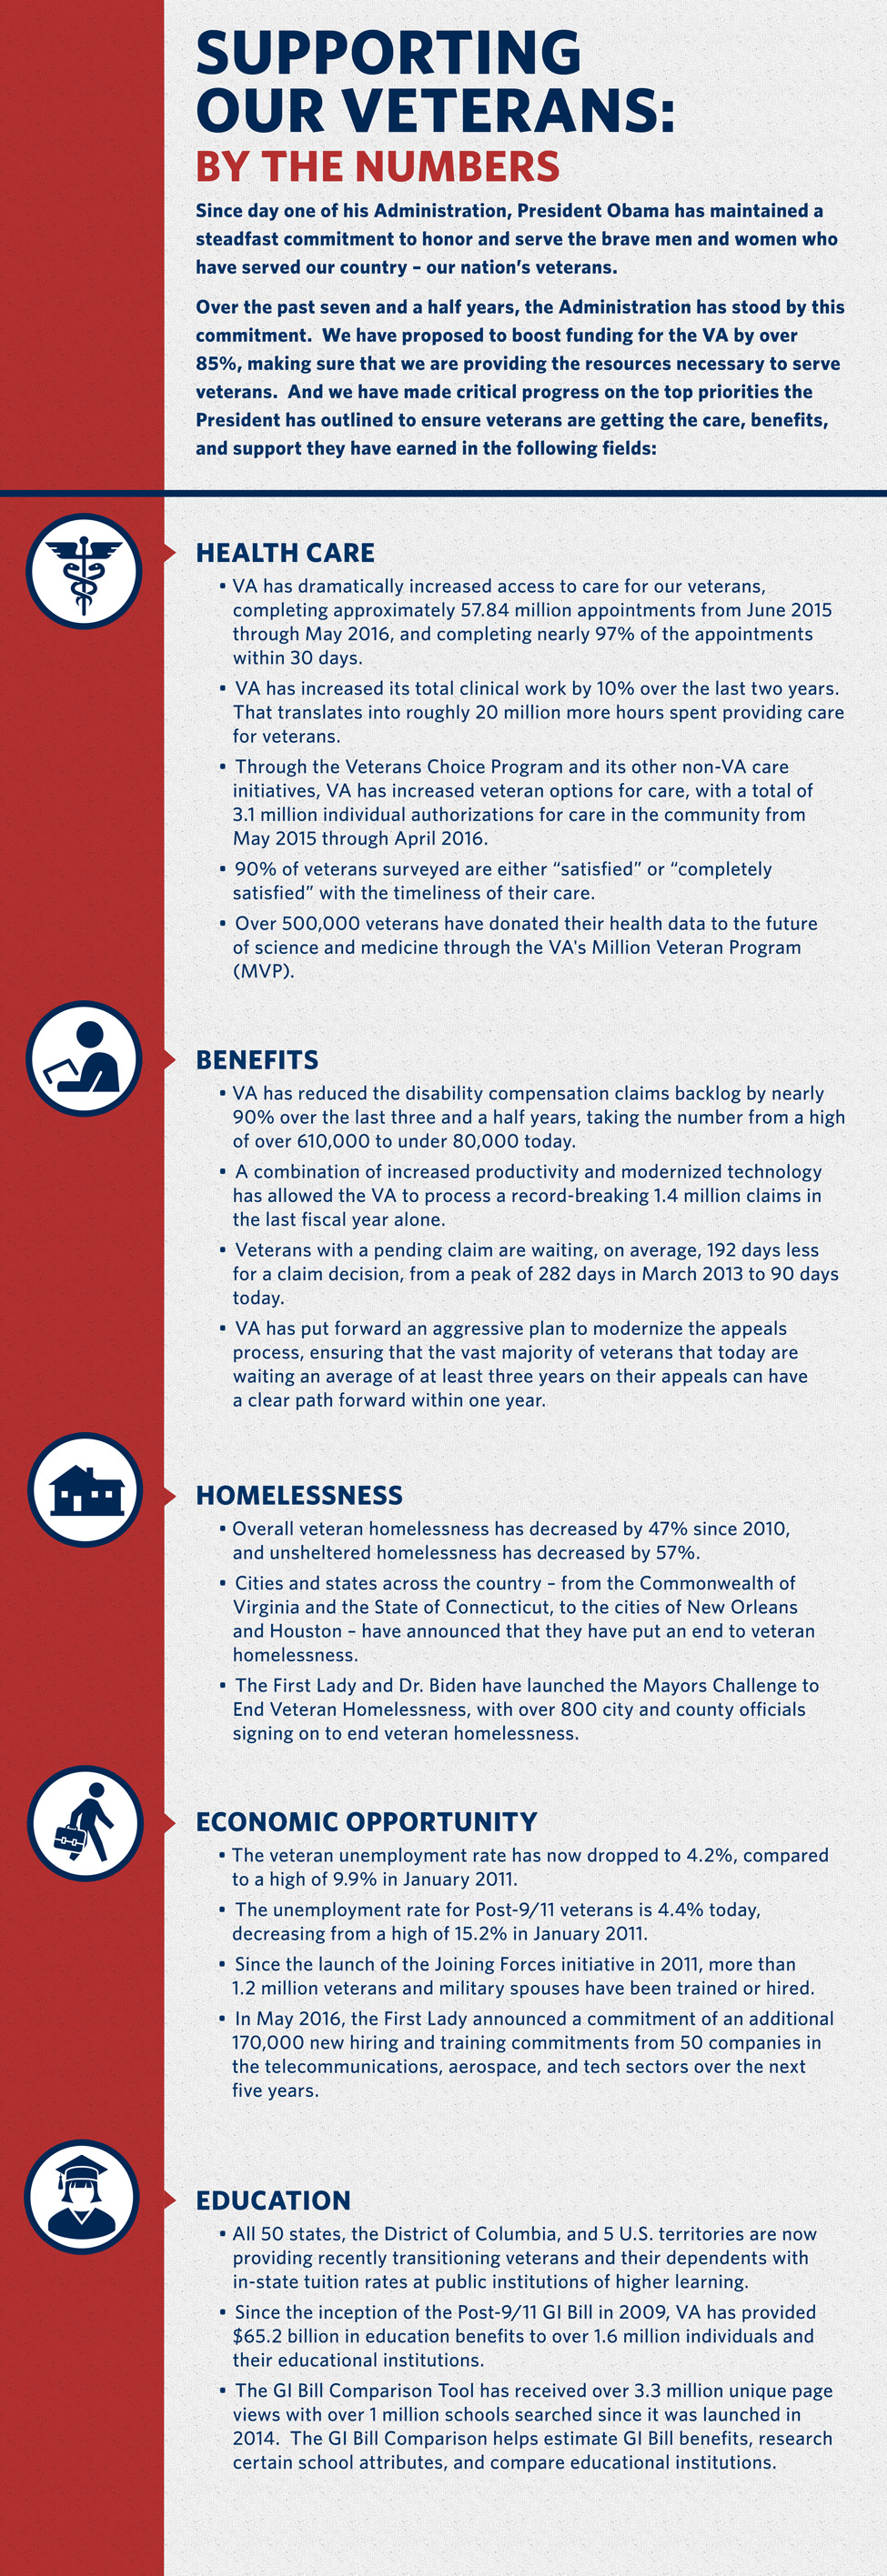 Infographic: How we're supporting our veterans